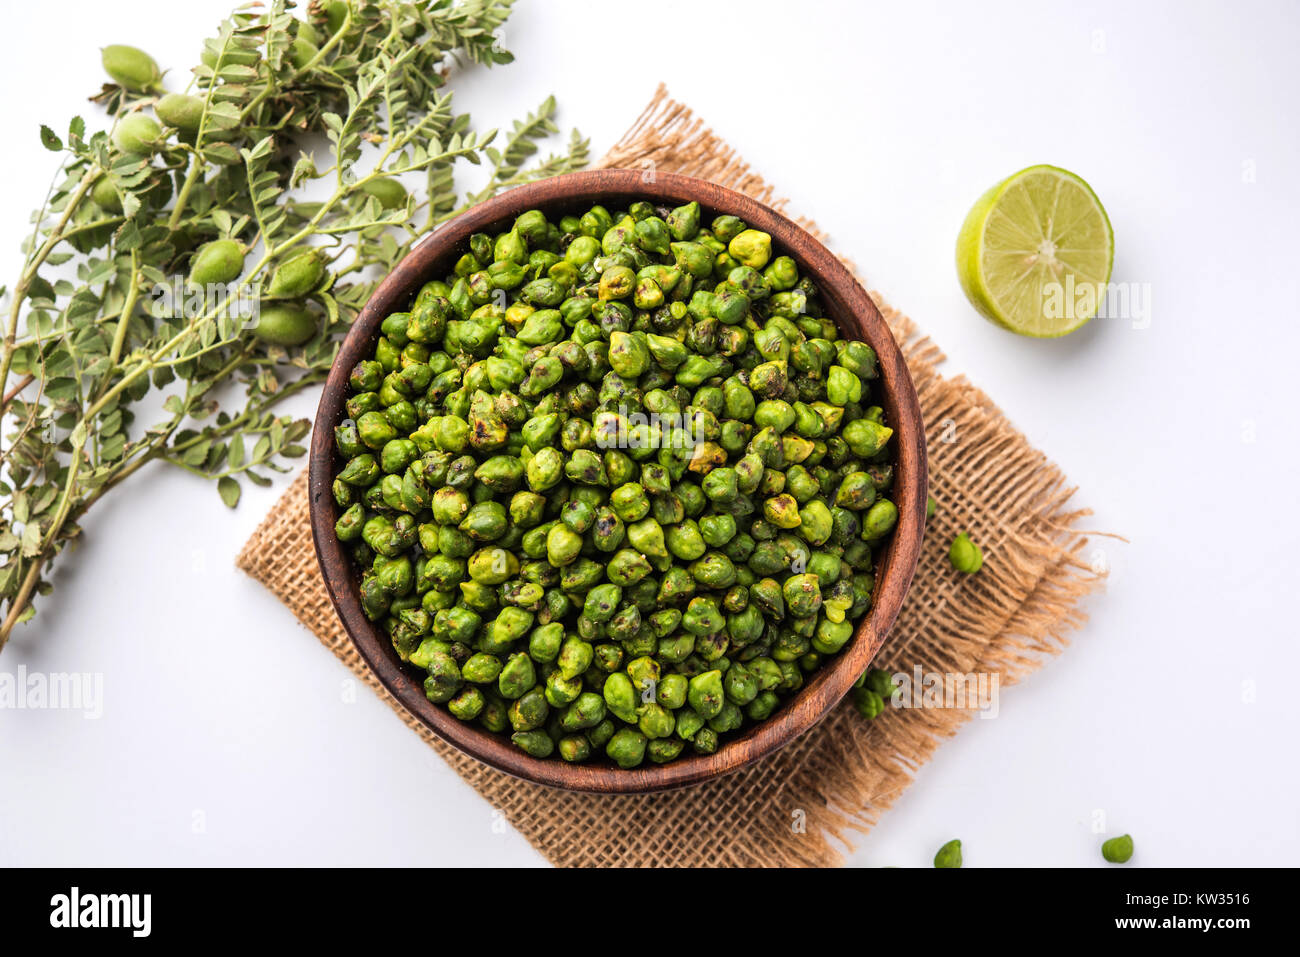 Roasted fresh Green Chickpeas or Chick Peas or harbara in hindi also known as Cicer with pinch of salt and chat masala and lemon, popular snack from I Stock Photo